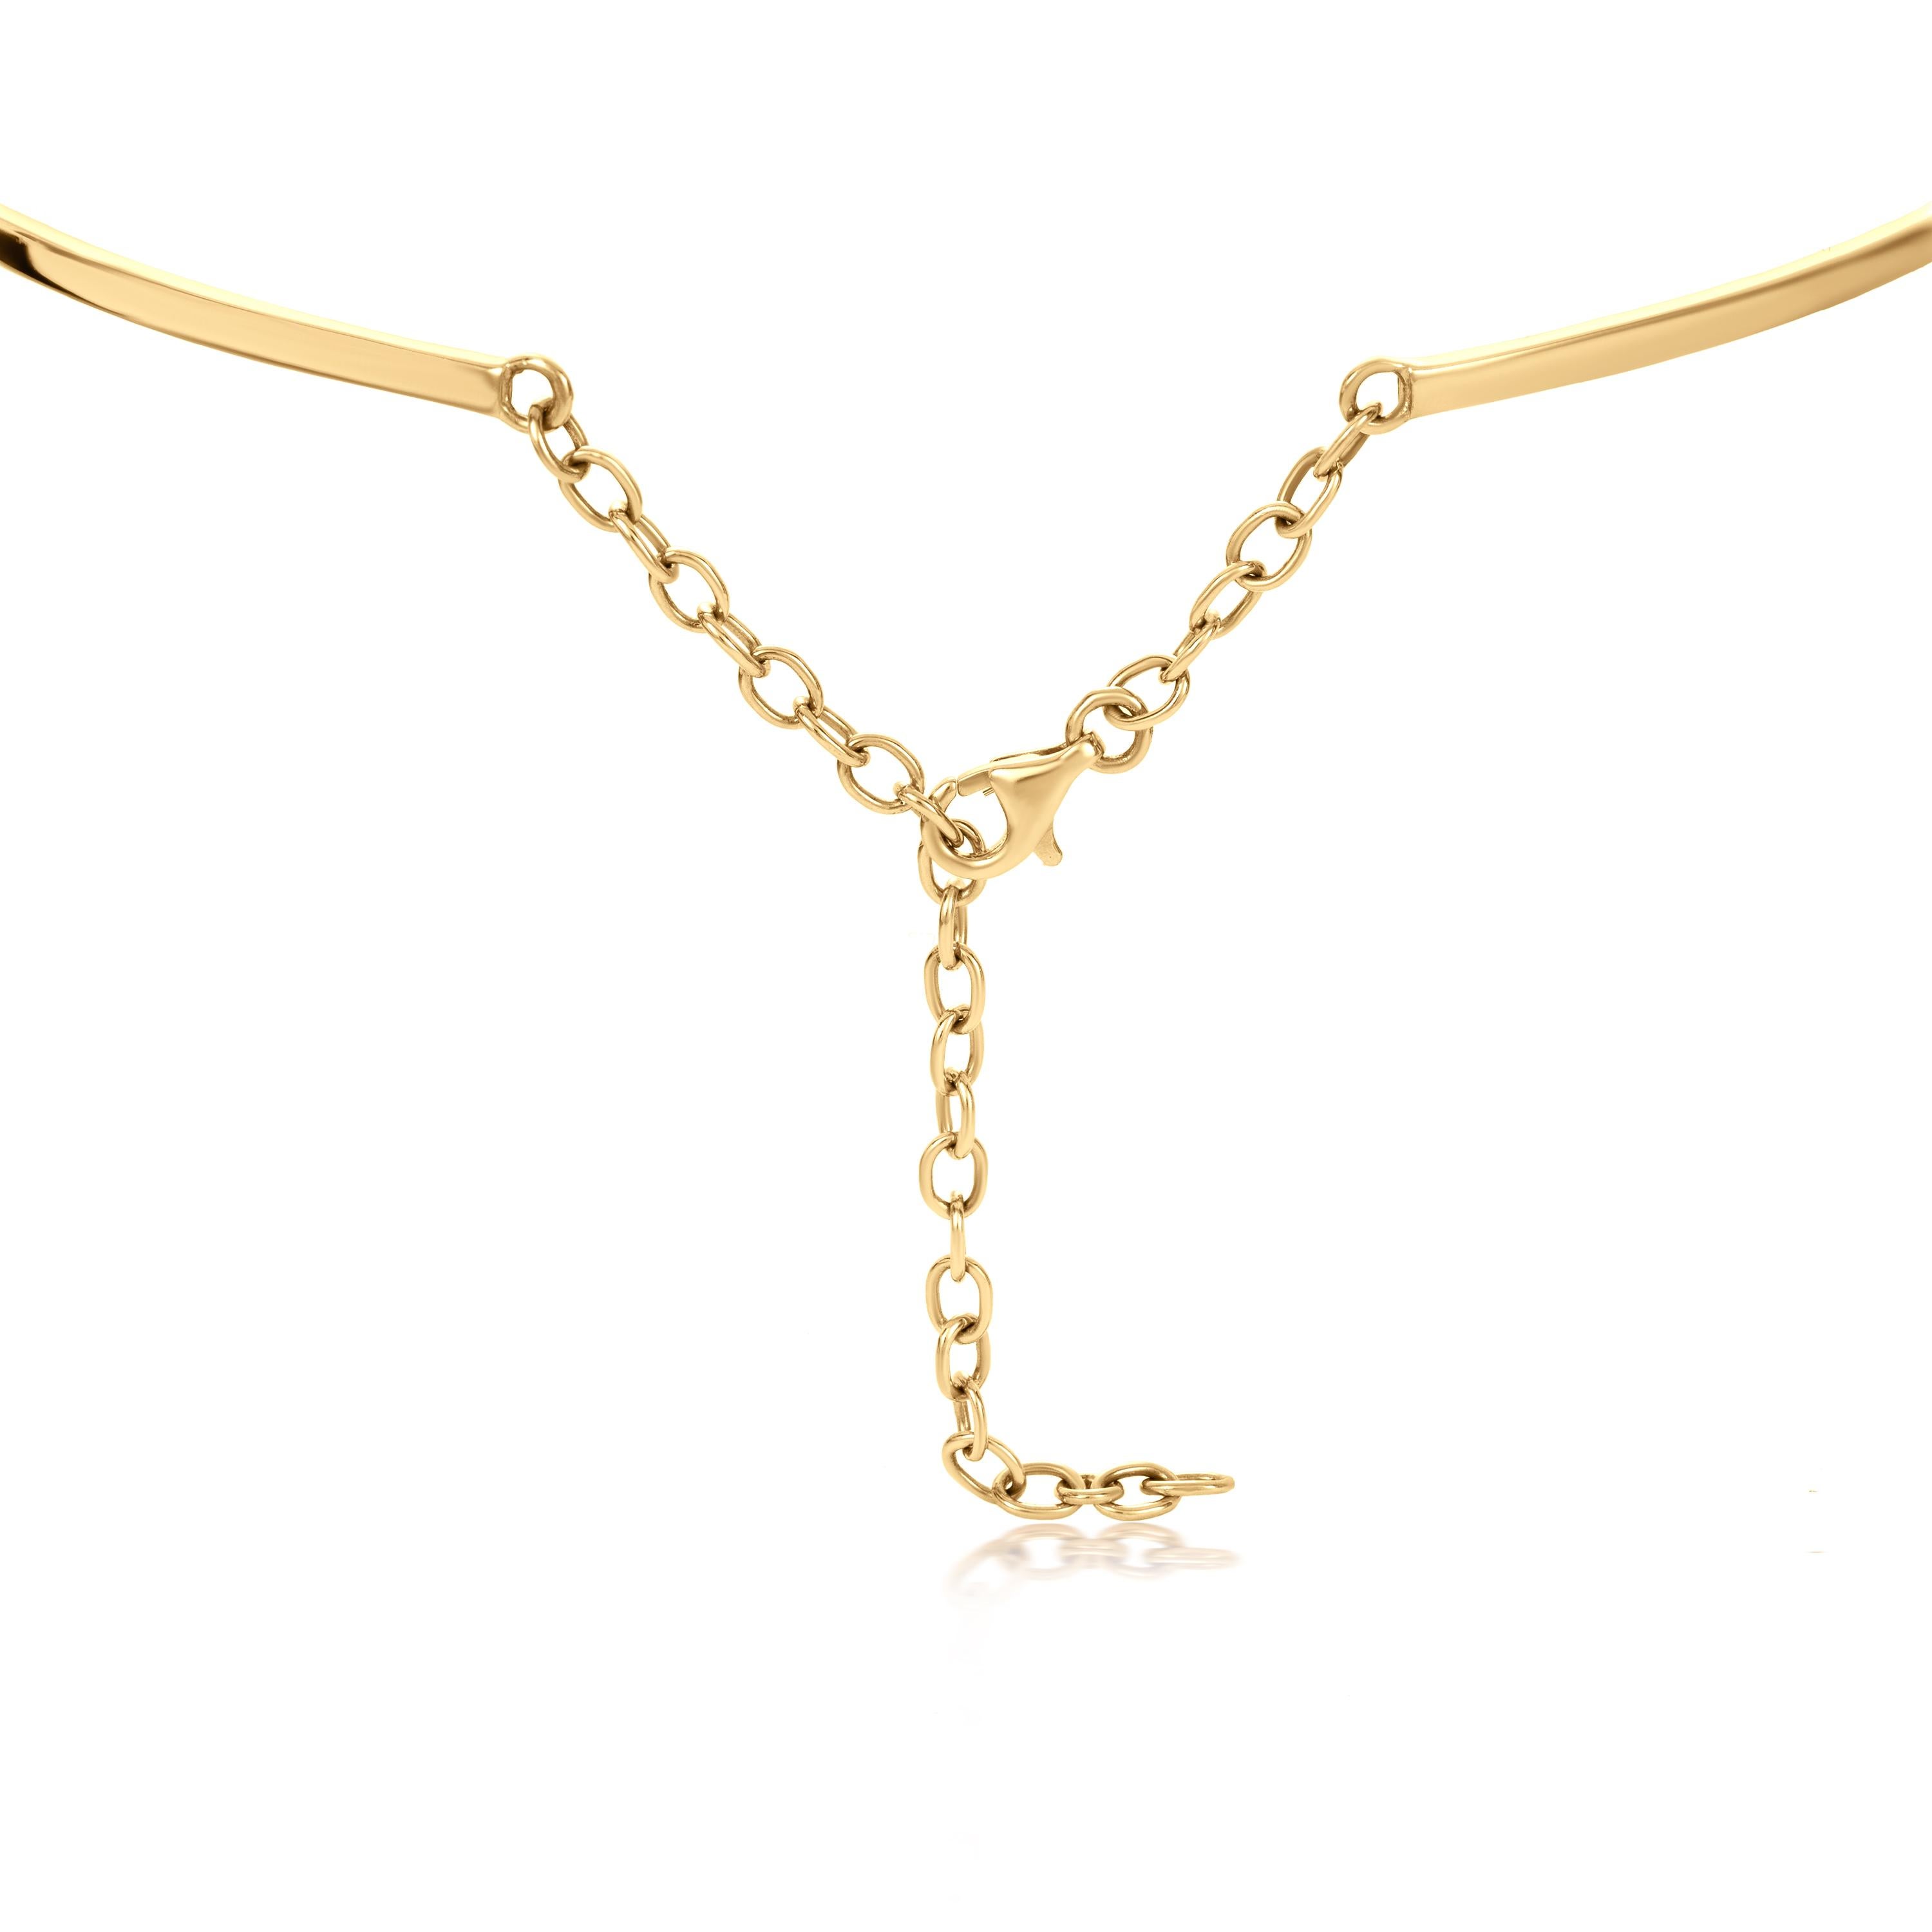 Contemporary Luxle 1.46 Cttw. Diamond Adorable Choker Necklace in 14k Yellow Gold